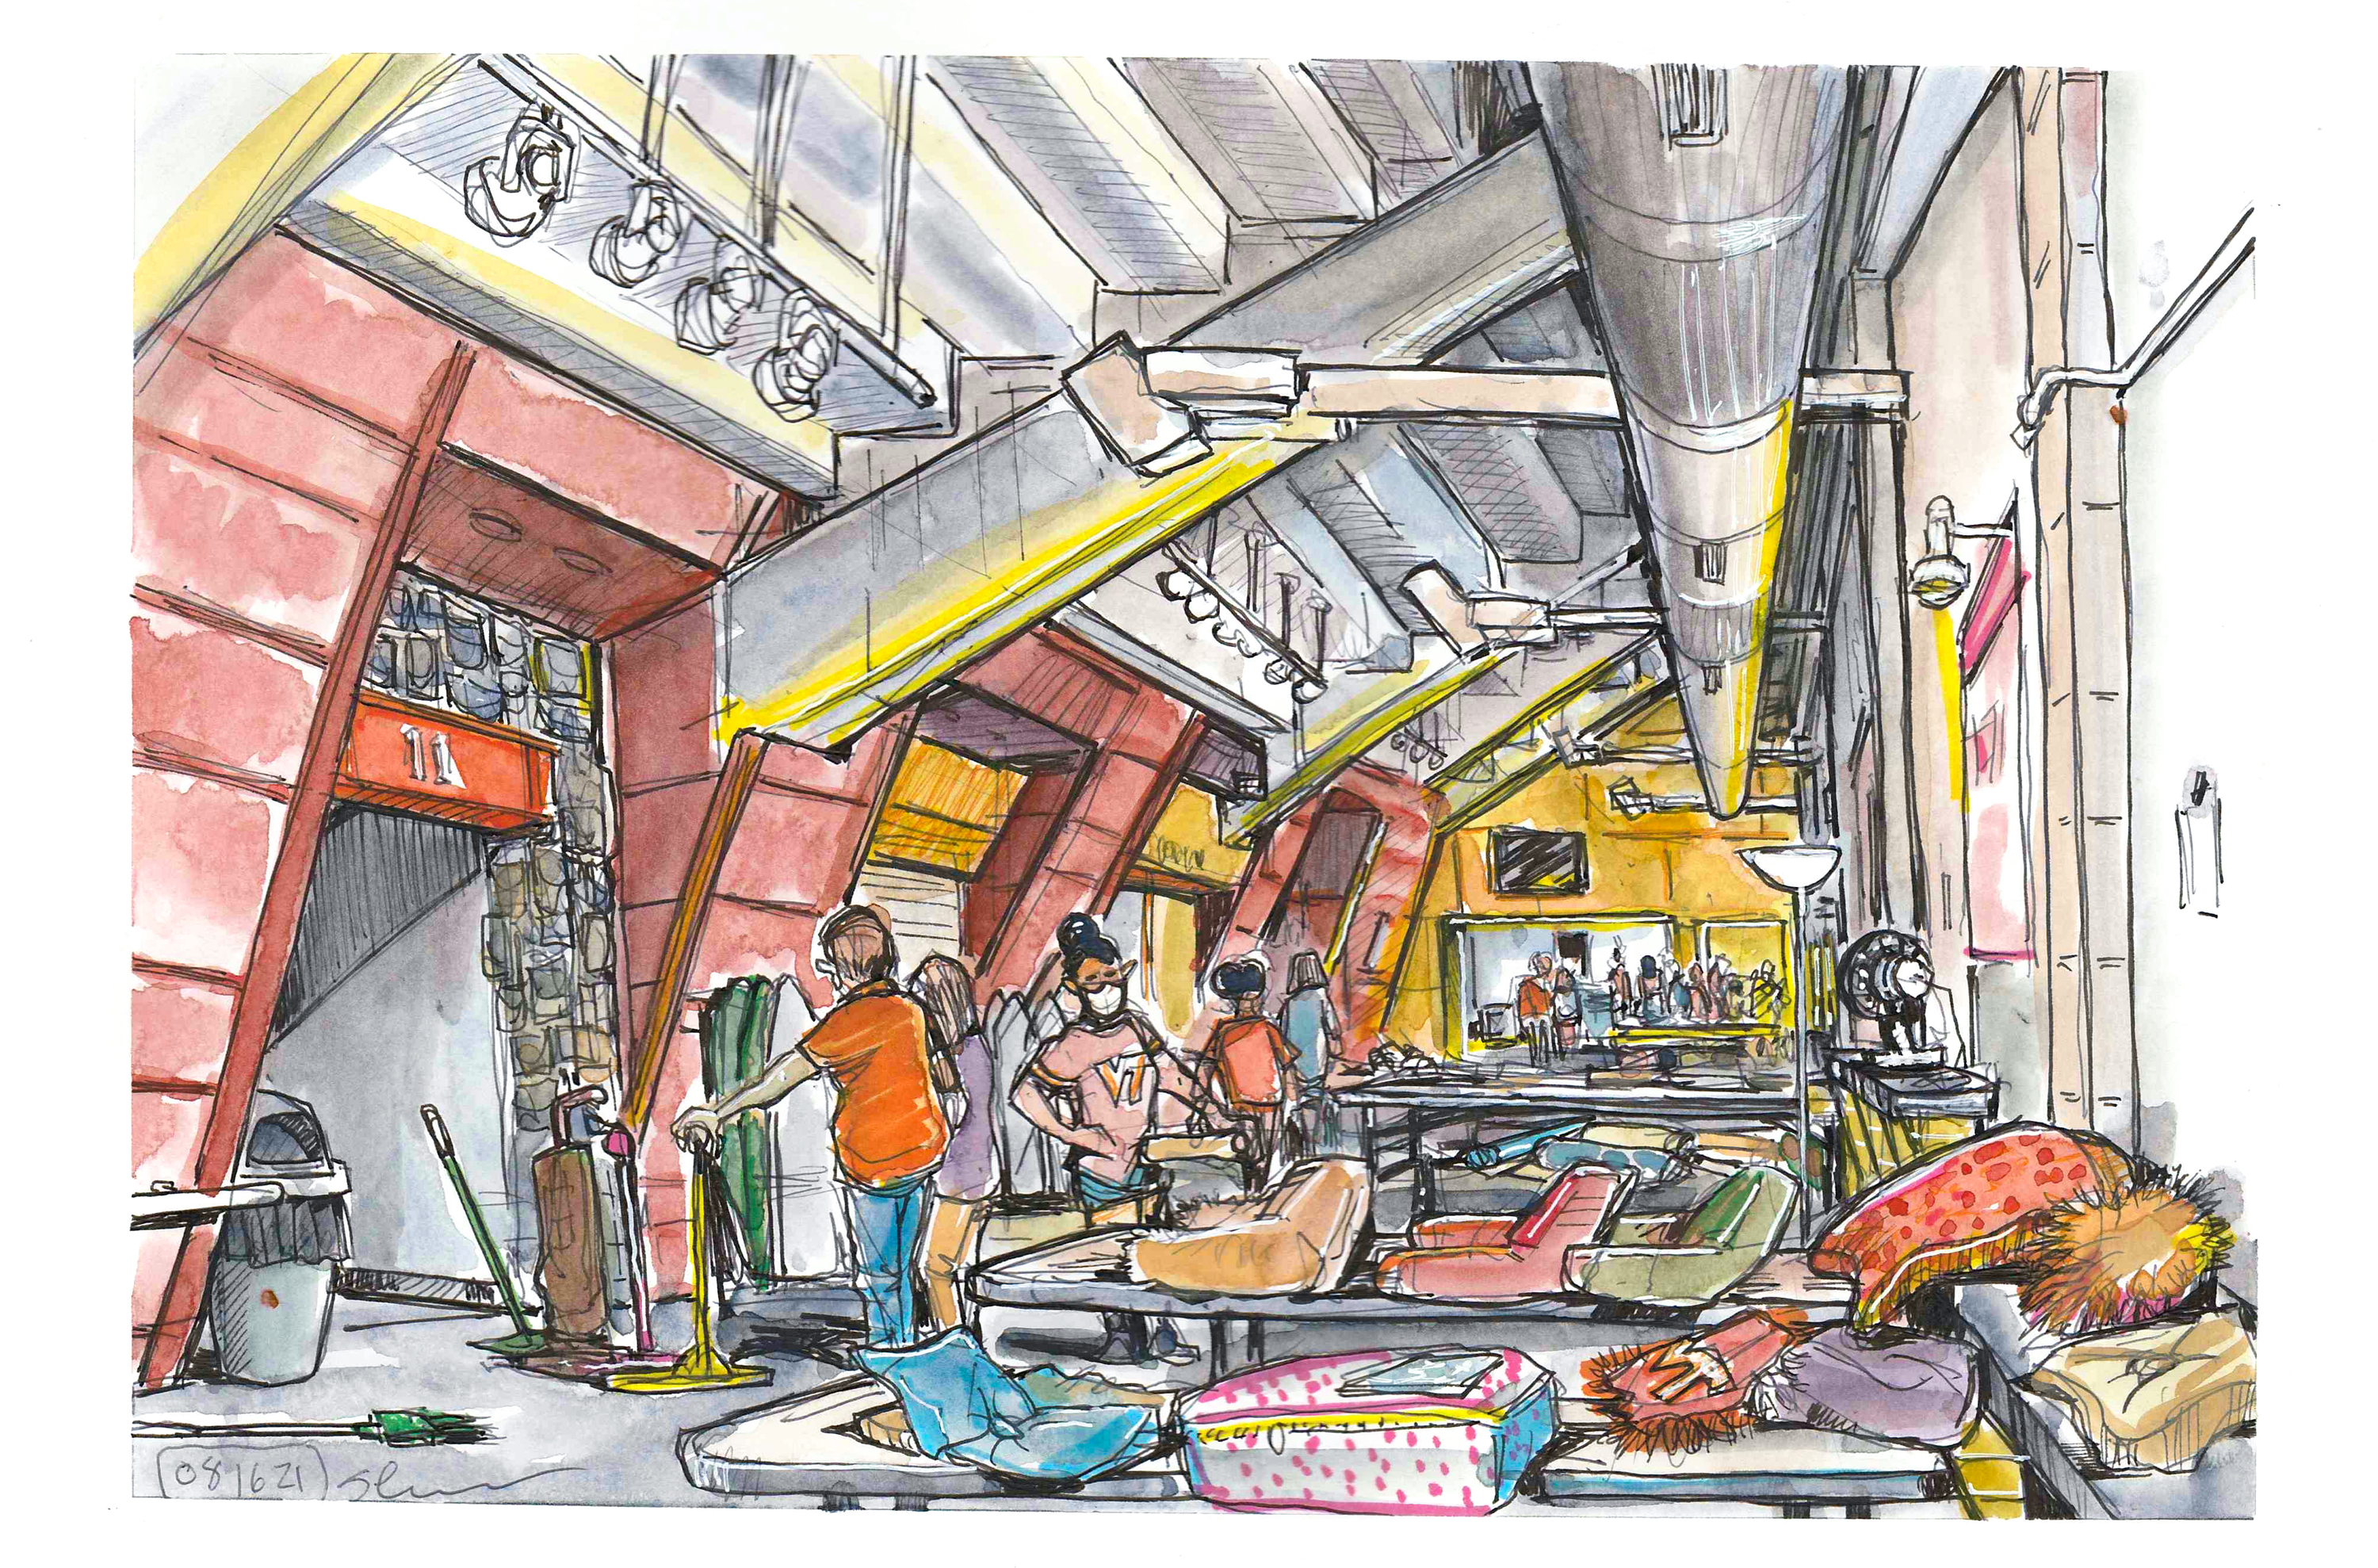 Sketch of a long hallway inside Cassell Coliseum full of thrifting items like pillows, rugs and vaccuums